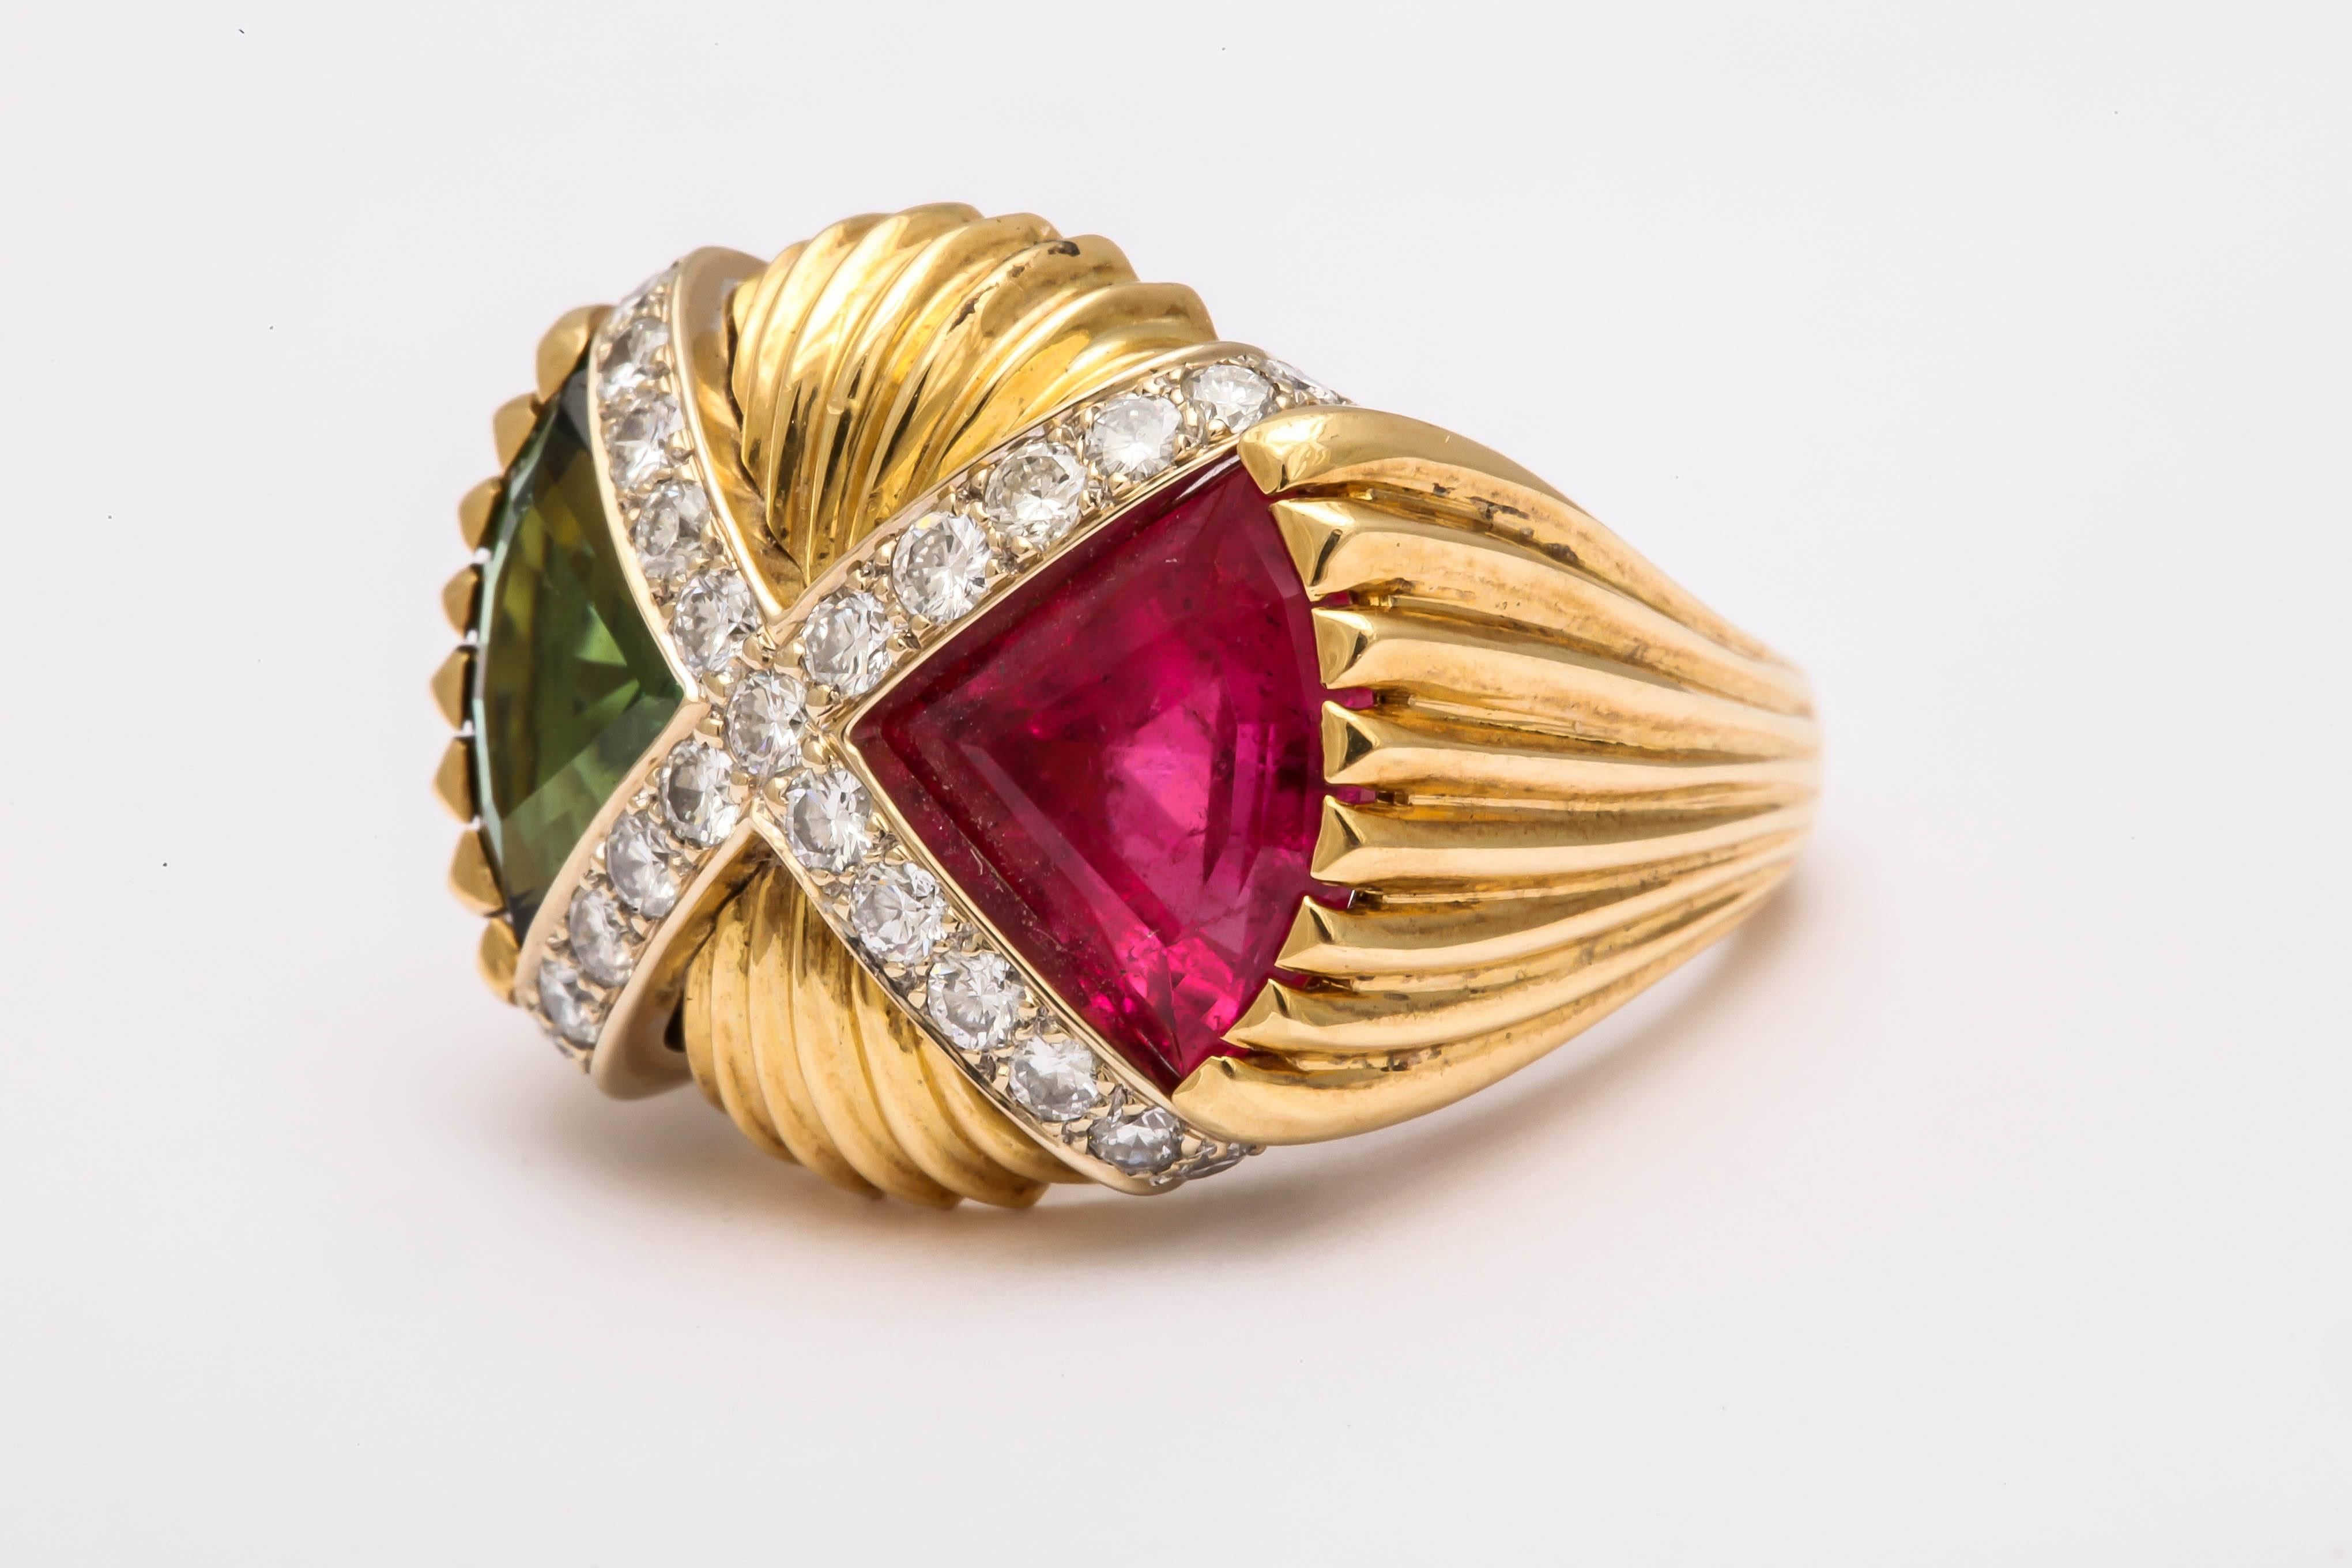 Exquisite hot pink and bright green pie slice shaped tourmaline ring. This unique ring is 18 kt gold plus 1.02 cts with diamond set pave set in 18 kt white gold in an 'X' pattern dividing the tourmalines, weighing 13.56 cts for the pair.  This ring